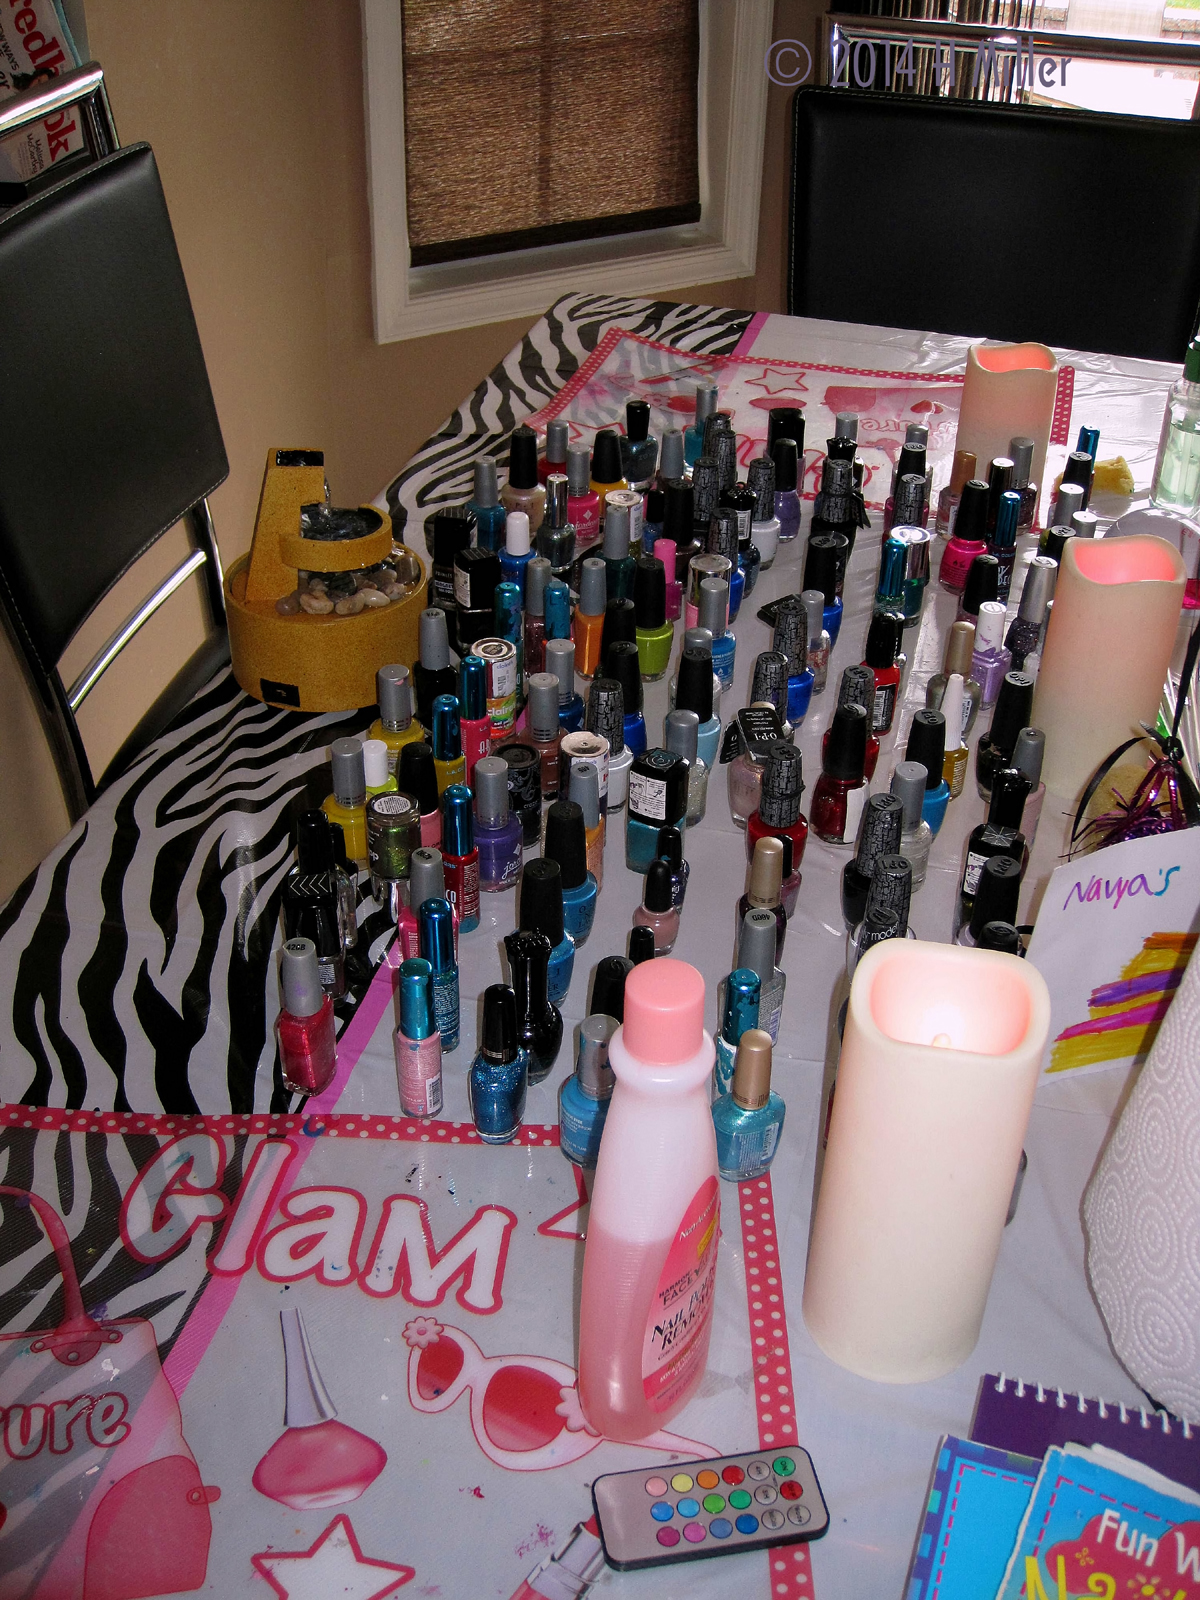 An Assortment Of Nail Polish Colors And Types